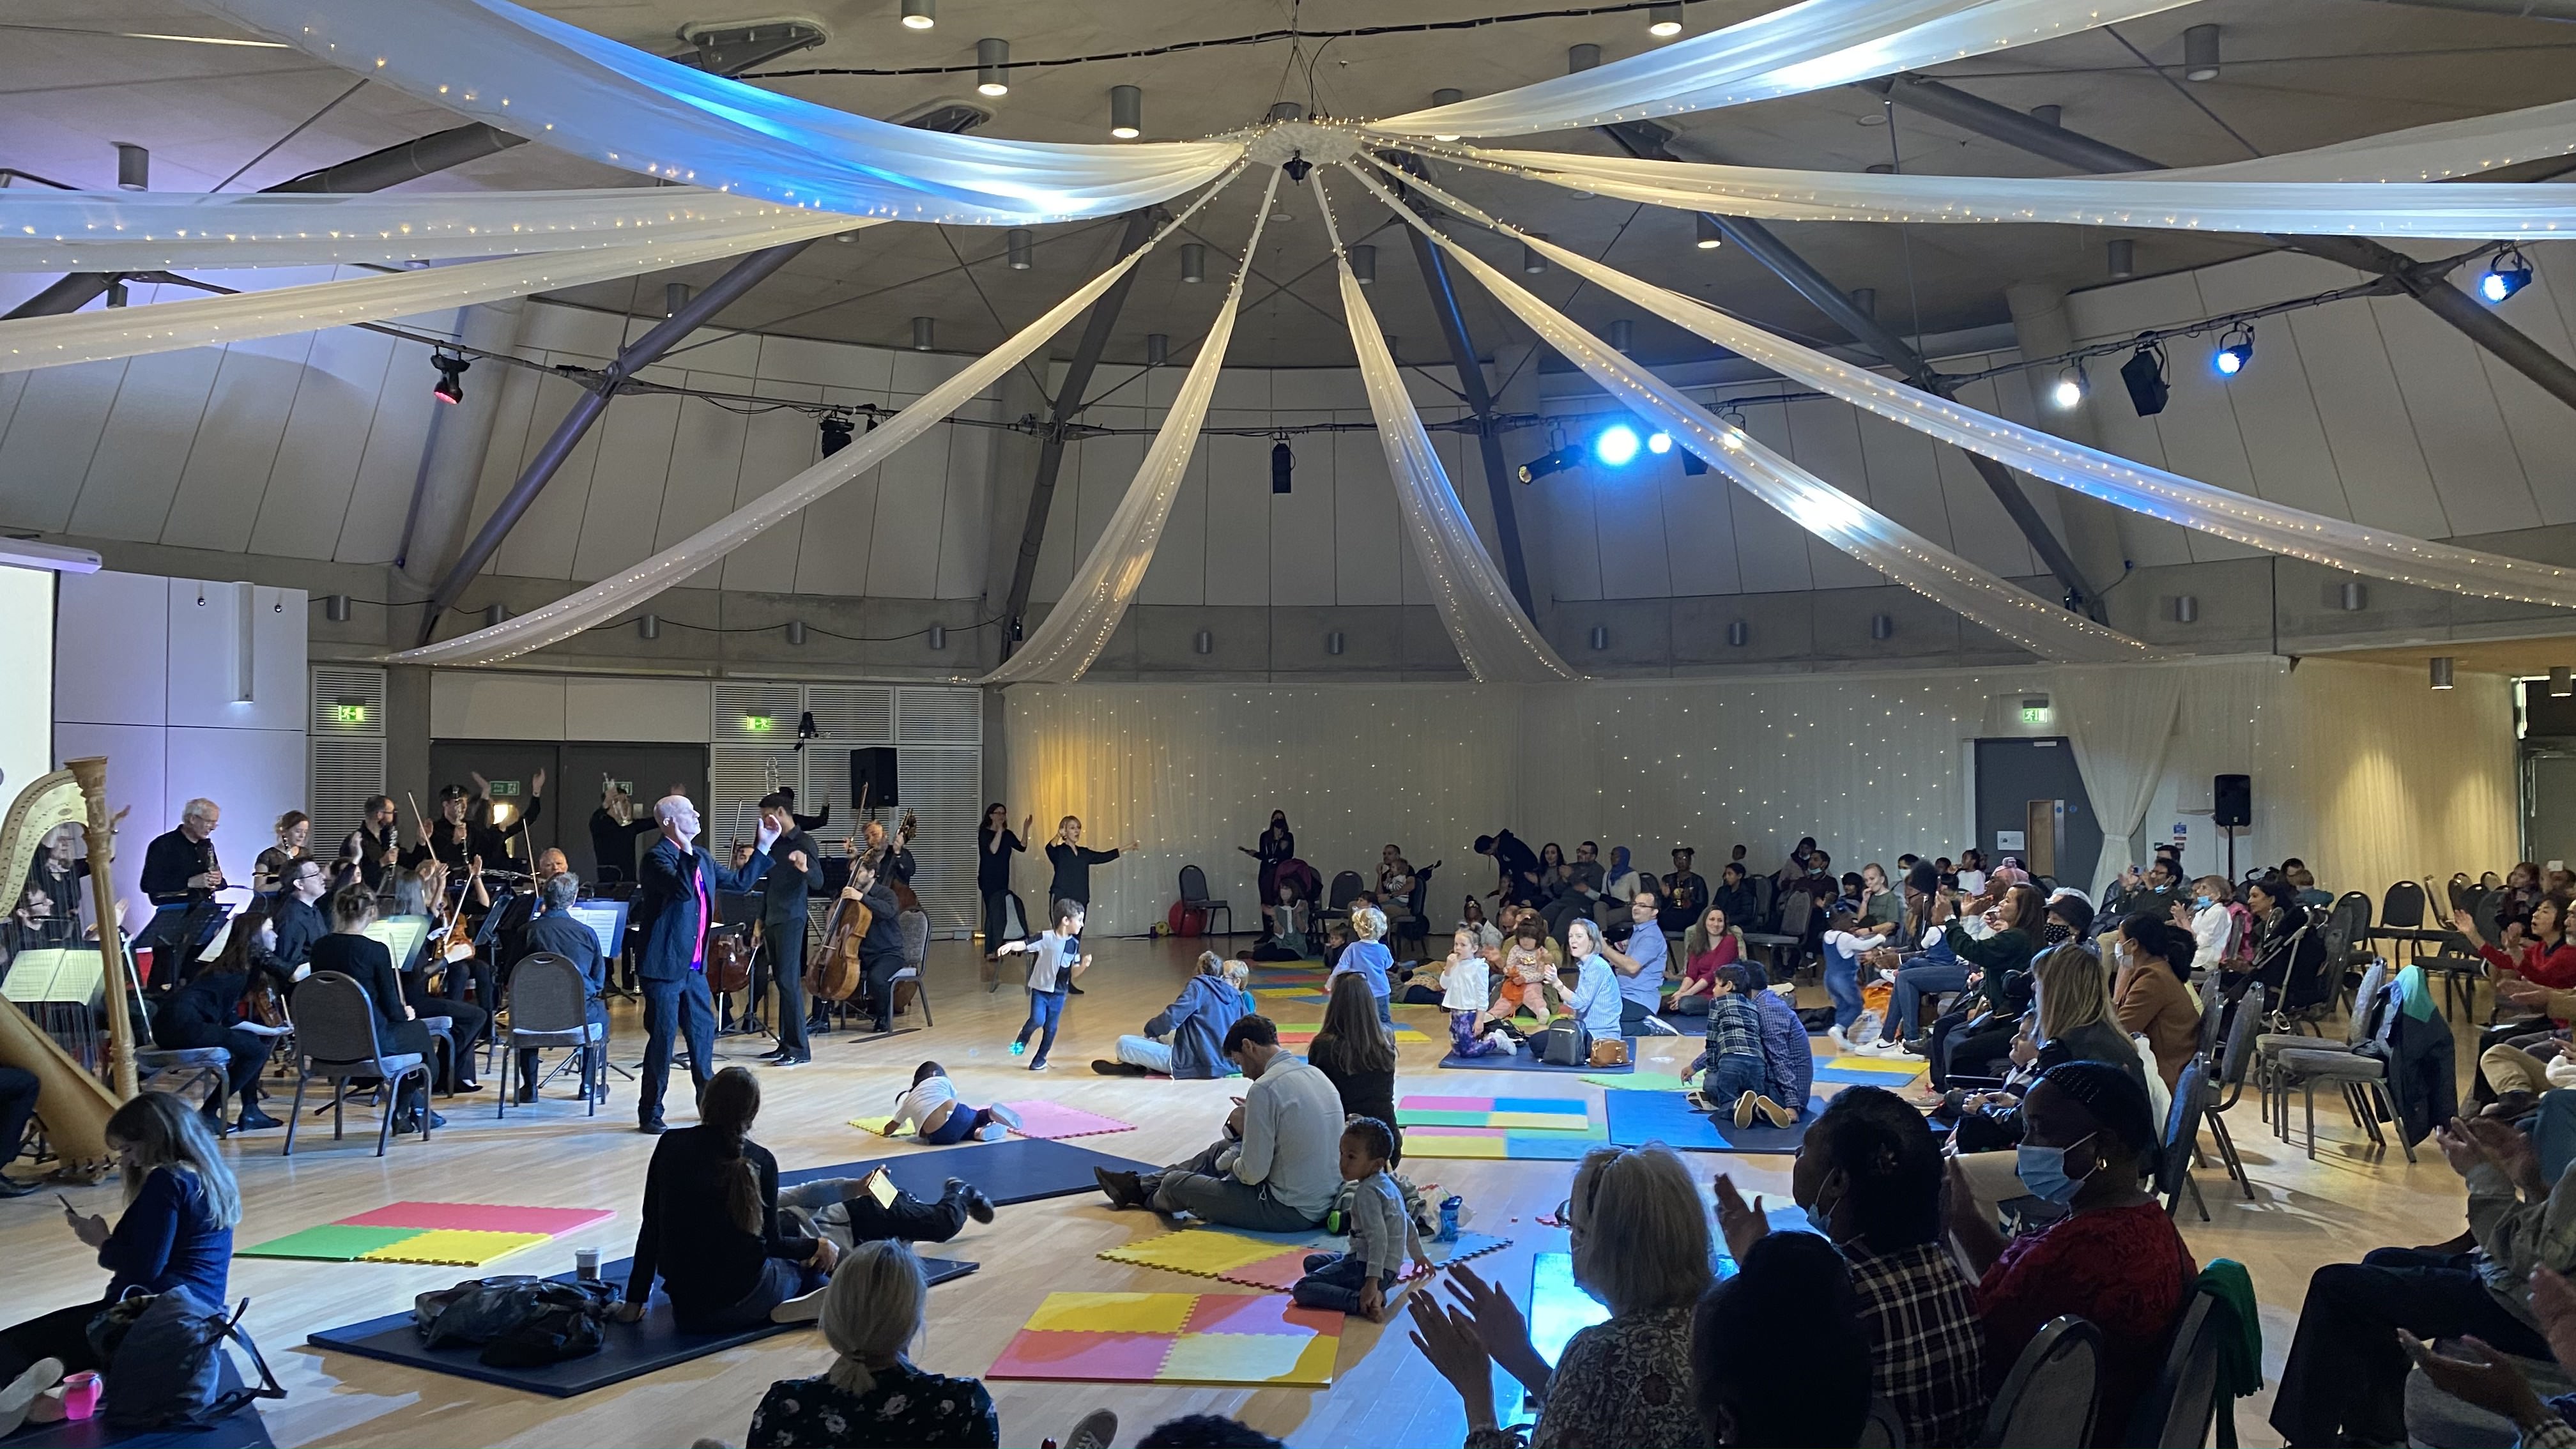 An image showing a small orchestra performing in the Brent Civic Centre Dome. There is a man who is the presenter talking to the audience. The audience are all looking at him. Some of the audience are sitting on chairs, some are on the floor on mats. The audience are young children and adults.